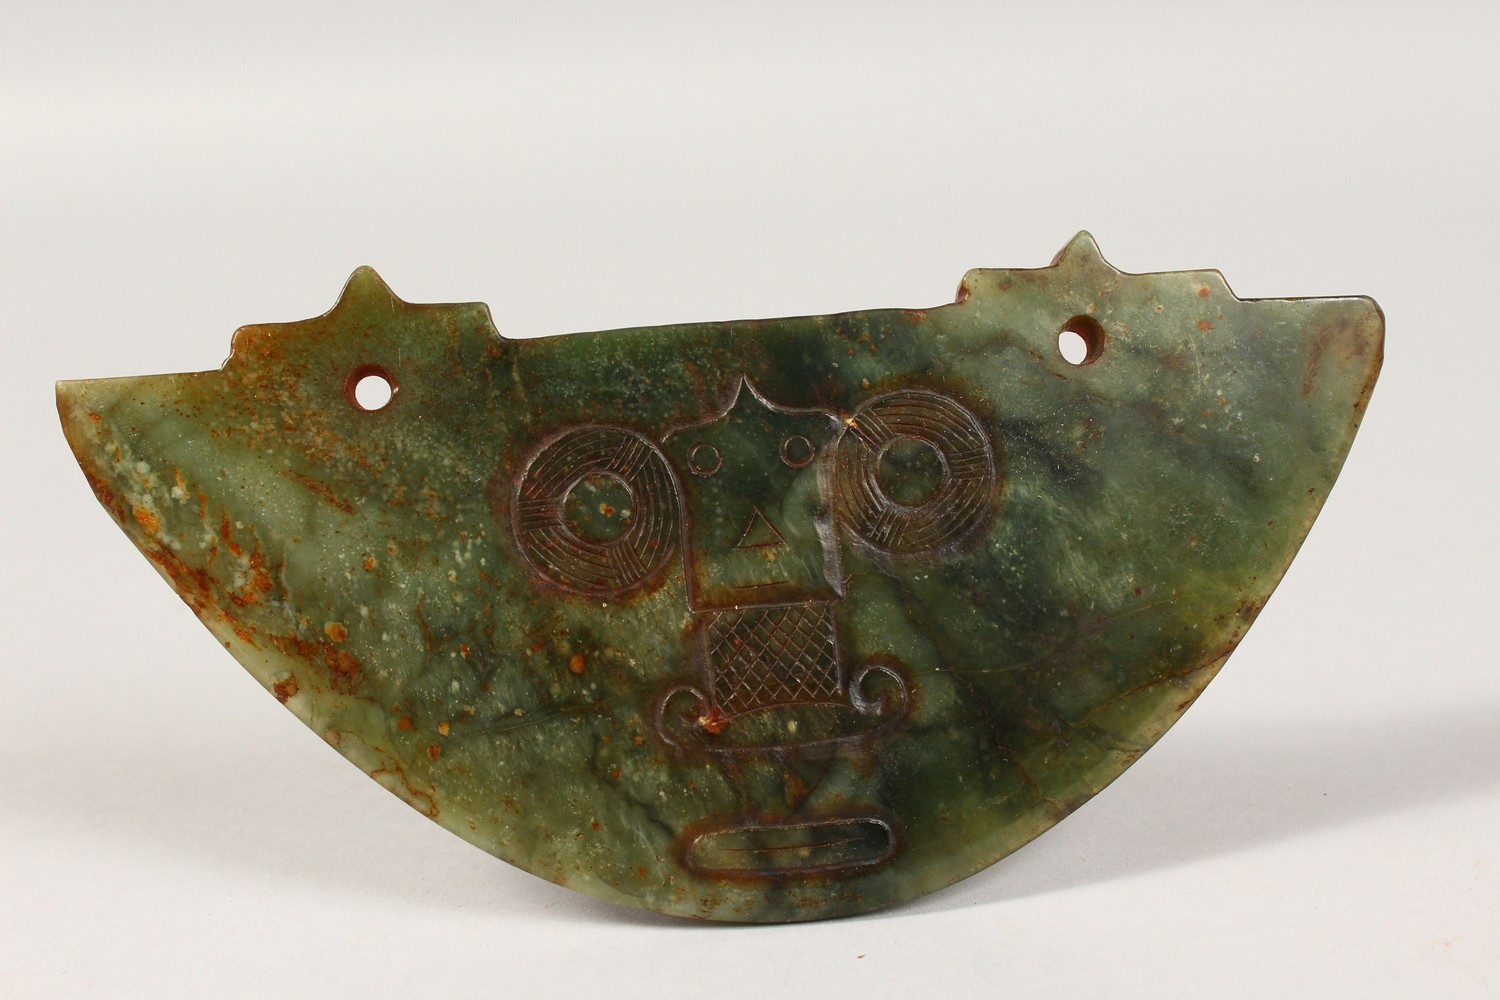 A LIANGZHU CULTURE JADE HUANG PENDANT, with incised decoration. 6ins wide. - Image 2 of 4